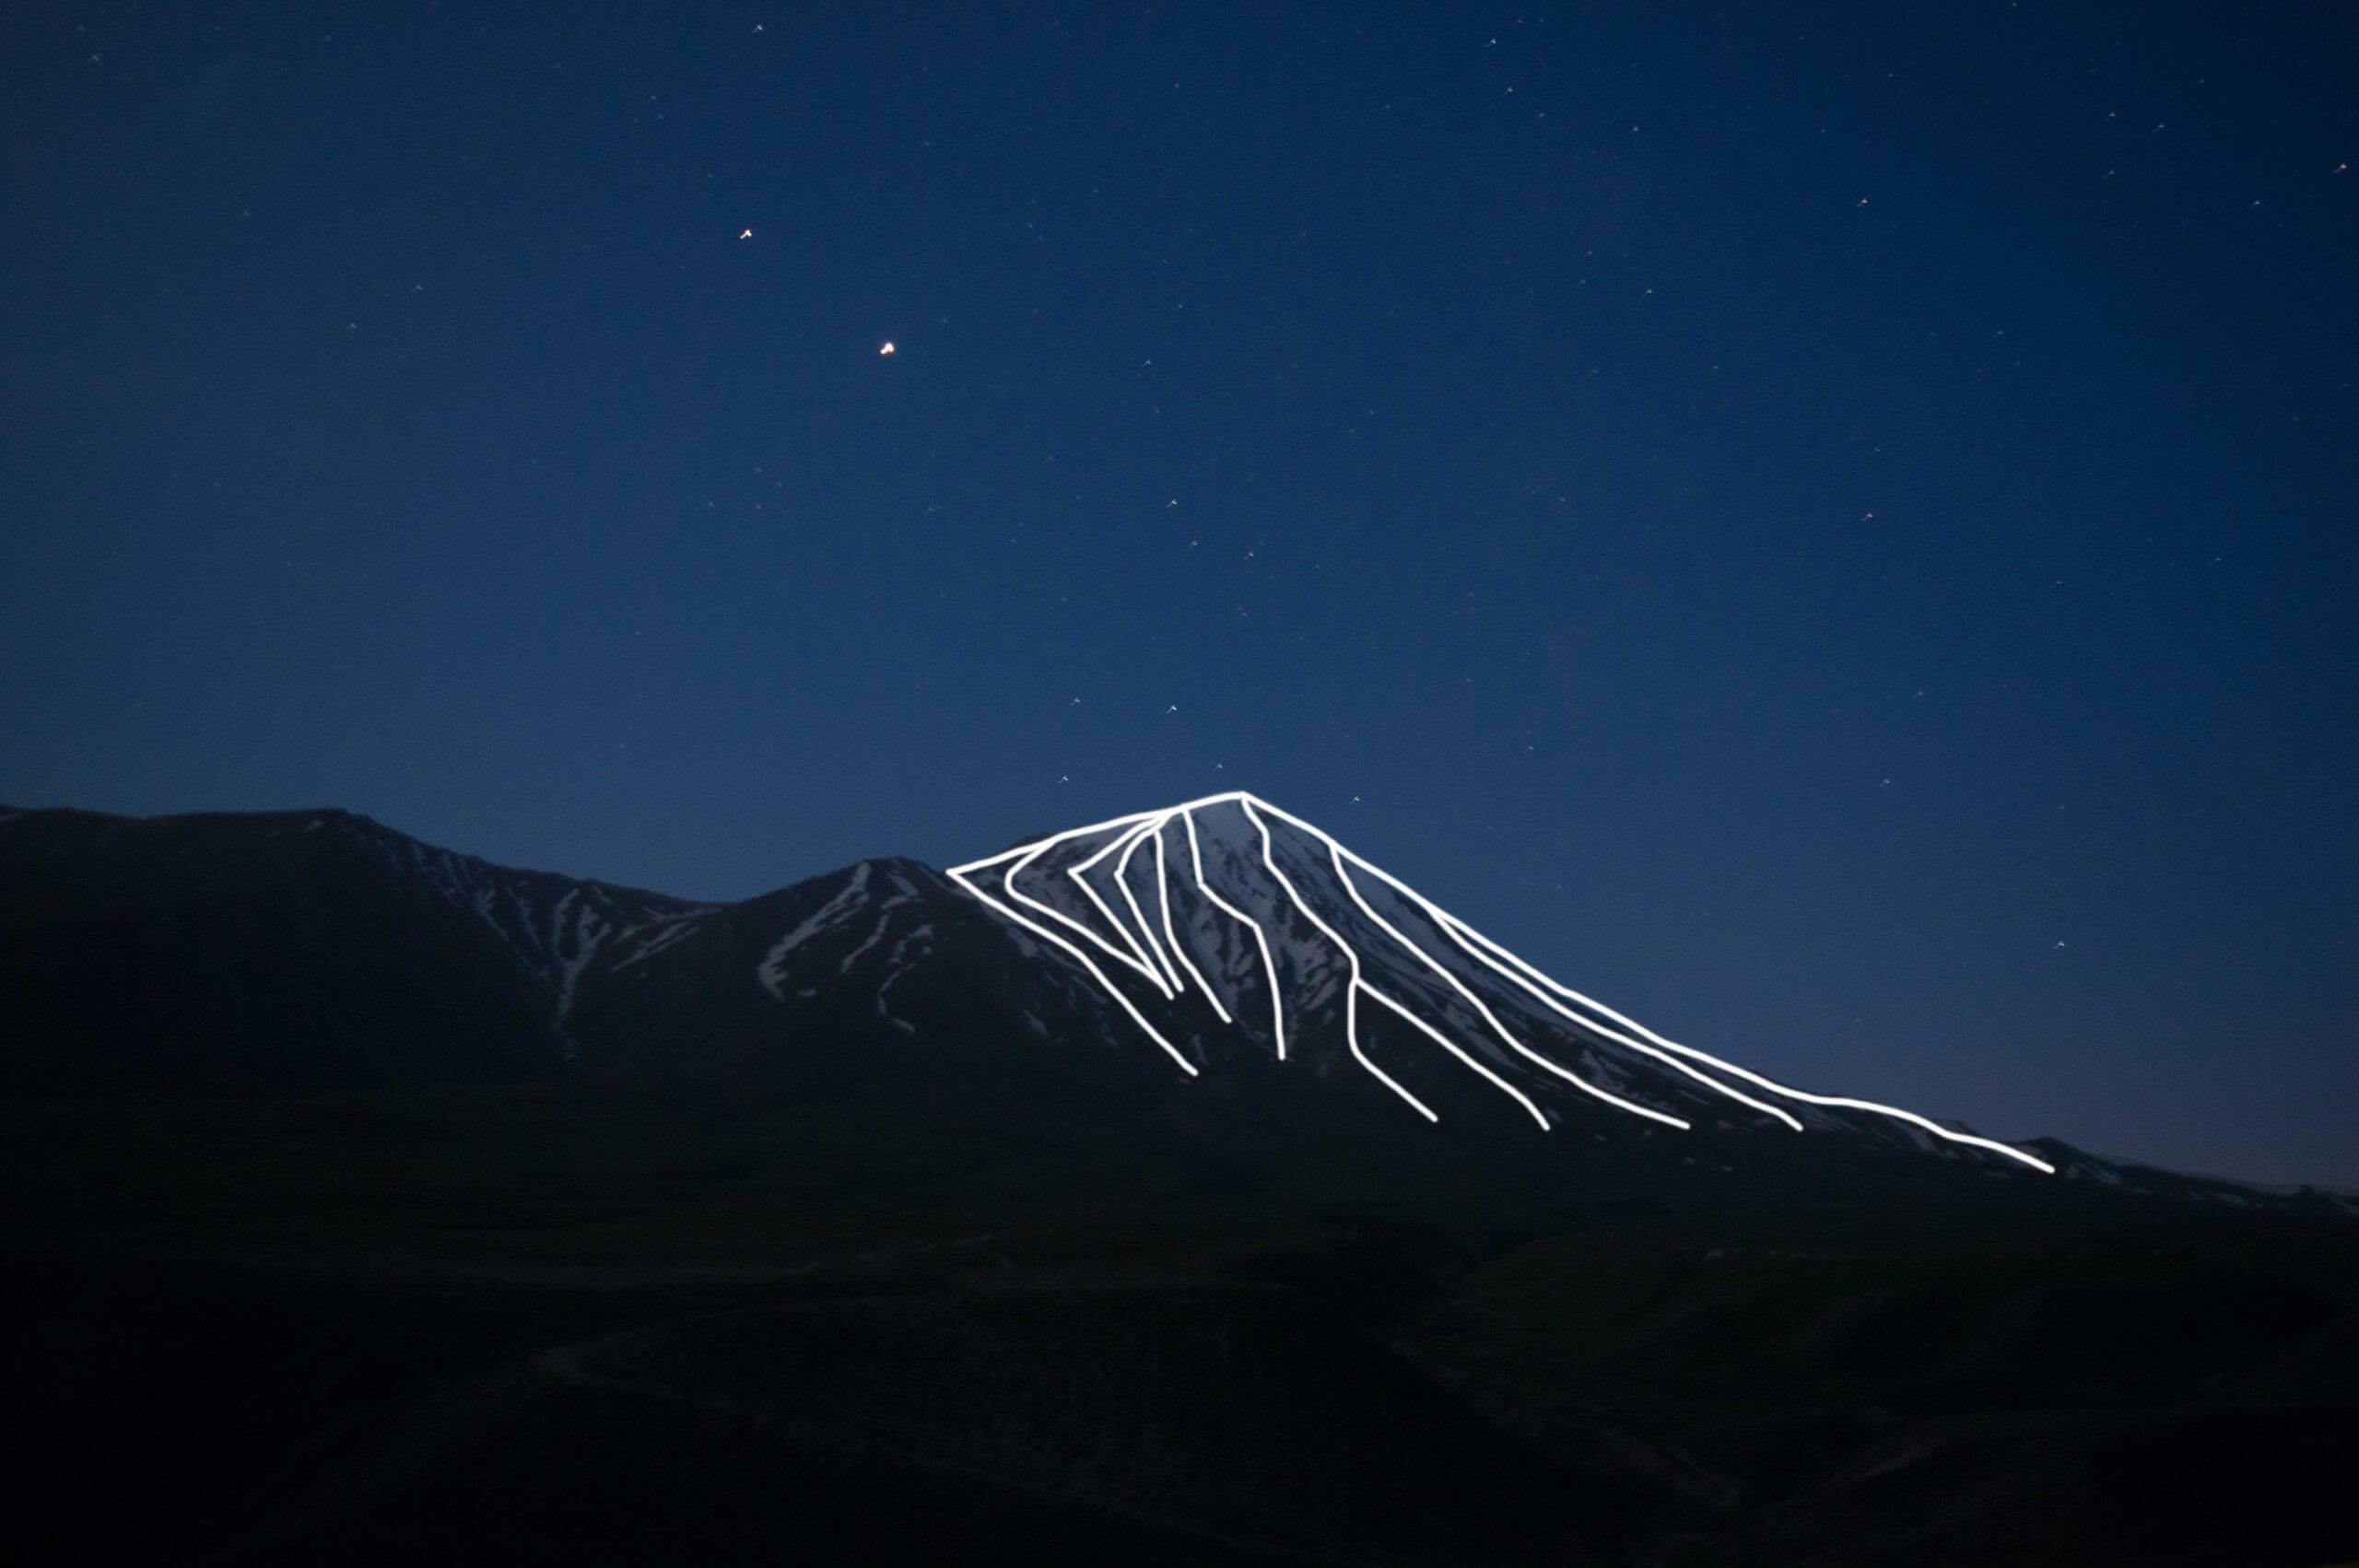 Europe Évènement - Photo of a mountain with laser projection of lines highlighting its relief